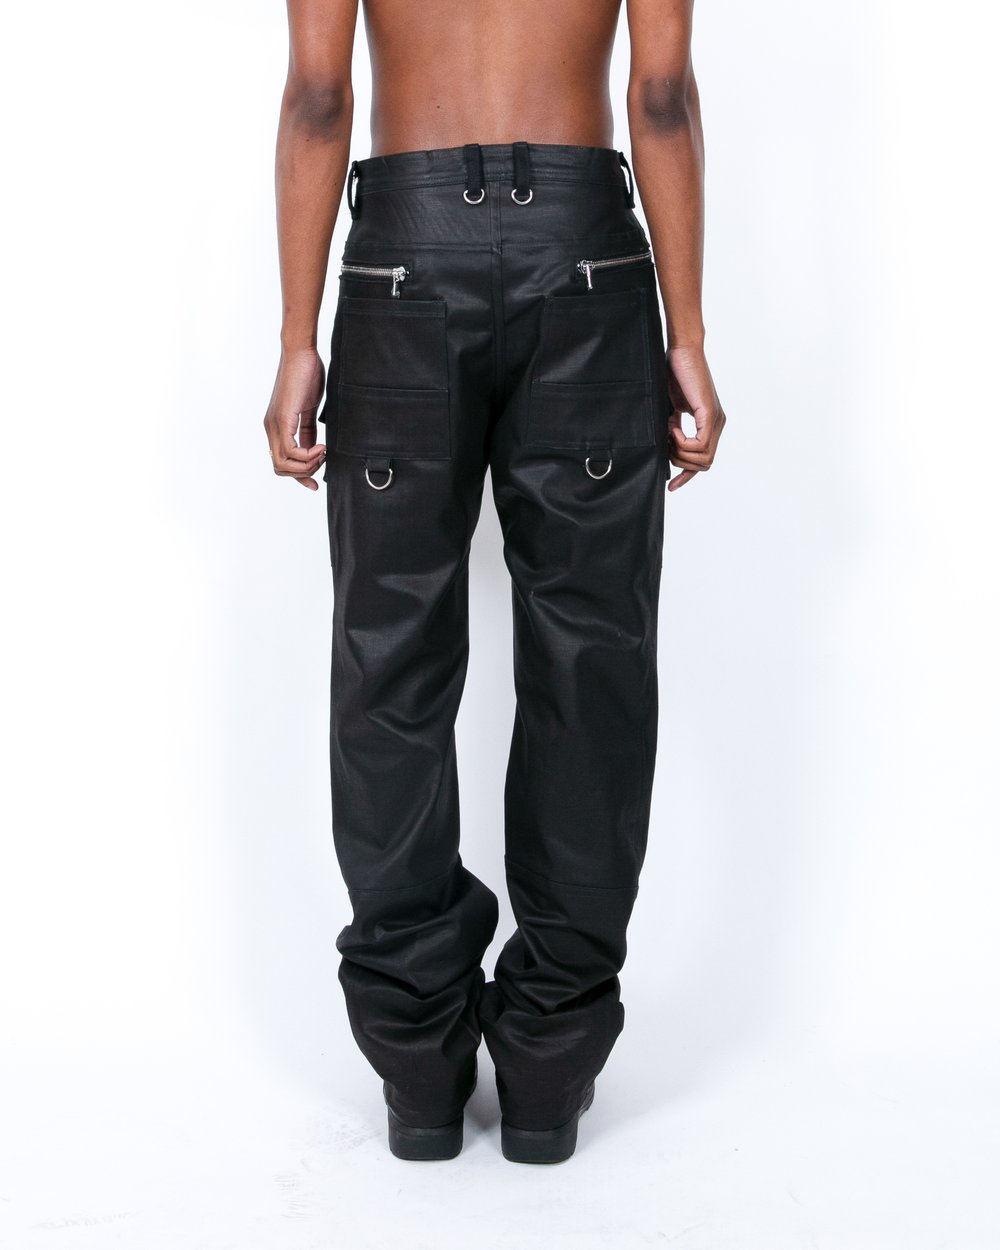 THE RIPLEY TROUSER 